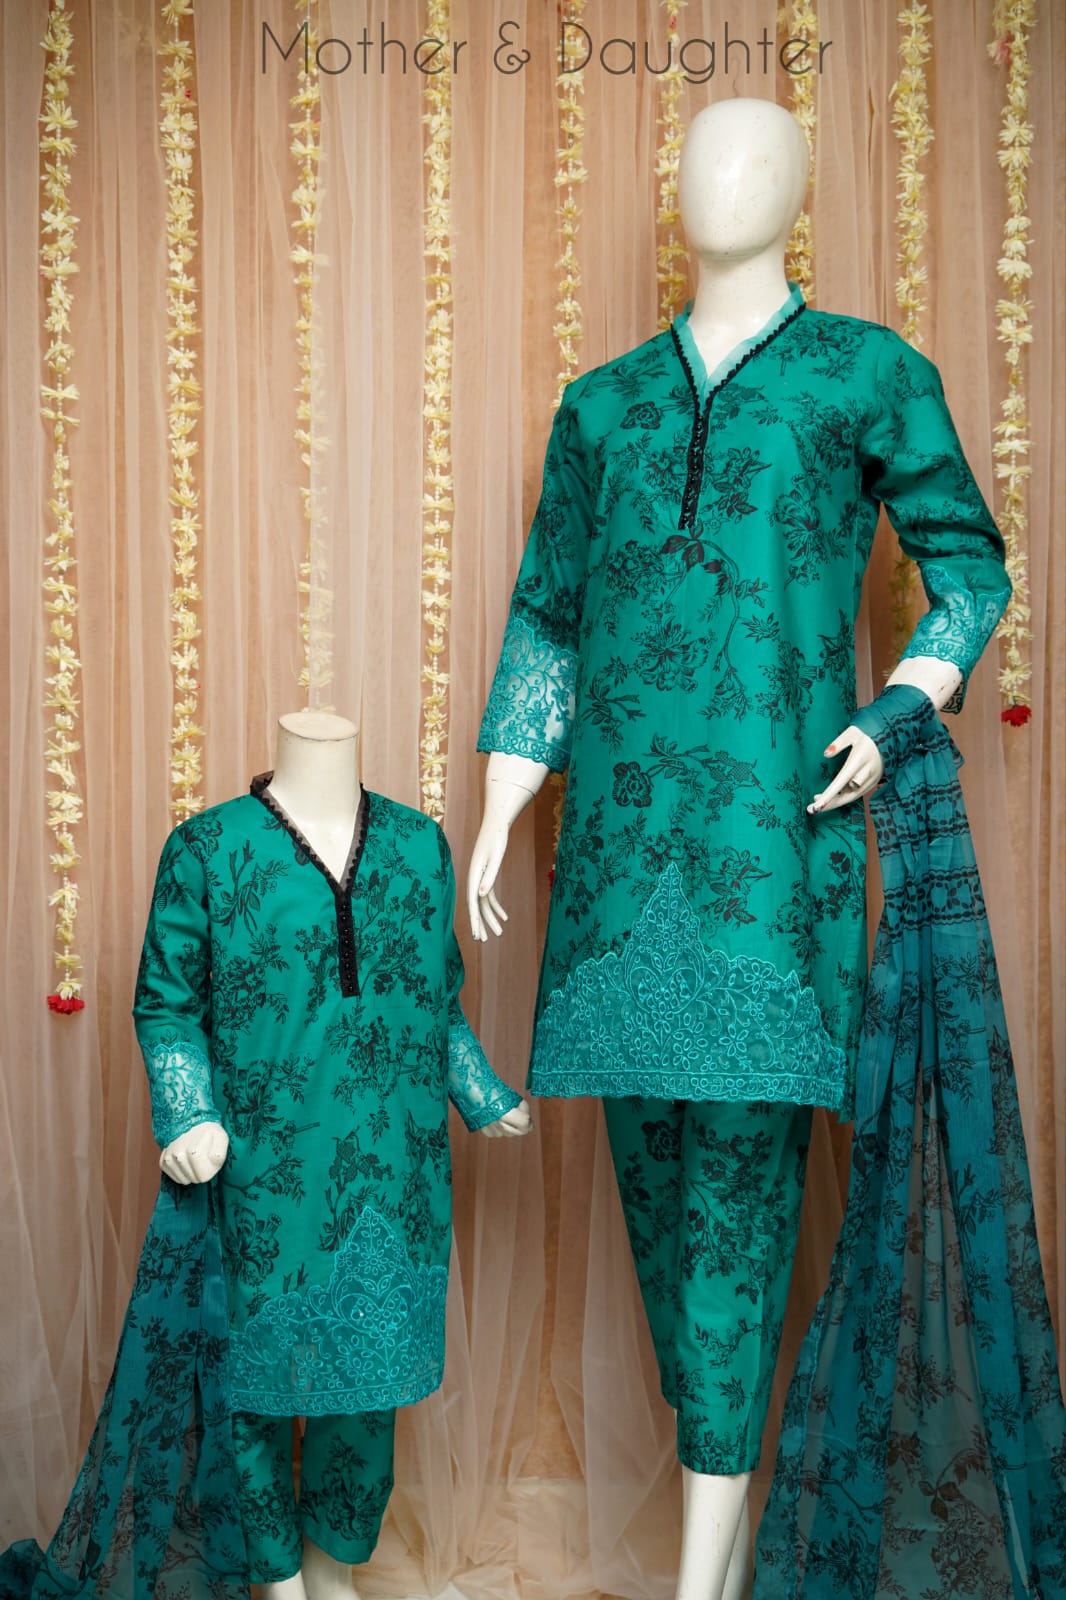 Celebrate Eid in style with this stunning Mother Daughter Matching Outfit! 

This beautiful 3-piece set features a printed cotton embroidered shirt and trouser for both mom and daughter, along with a flowy chiffon printed dupatta.

Size Daughter: 28, 30, 32, 34, 36 

Price: PKR 3100/-

Disclaimer:
Due to variations in screen settings and lighting, the colors of the actual product may vary slightly from what is pictured.